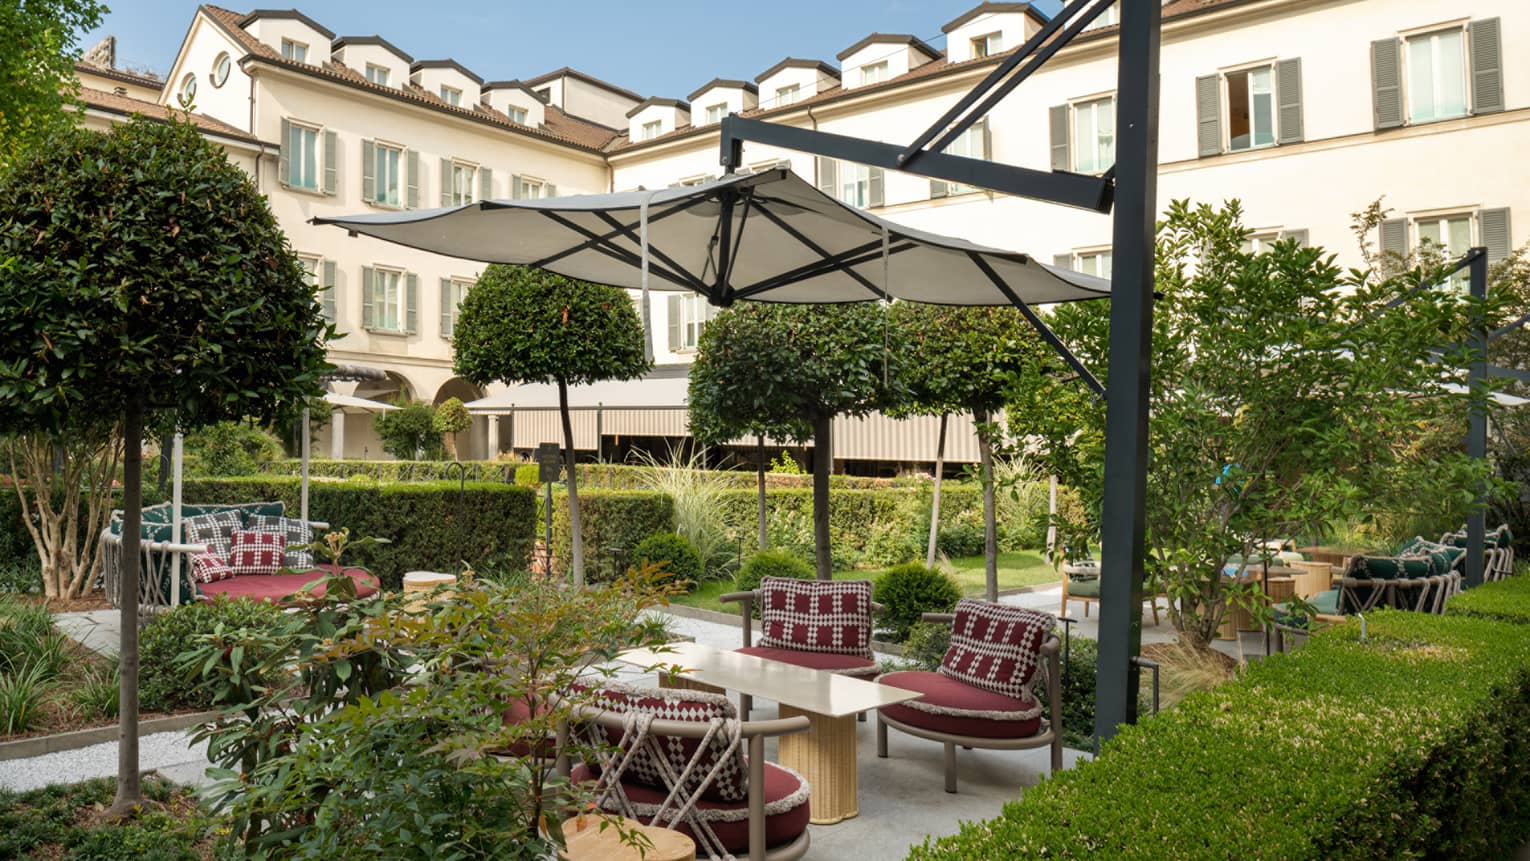 Elegant courtyard vignette under tan umbrella surrounded by hedge and topiaries with hotel in backdrop